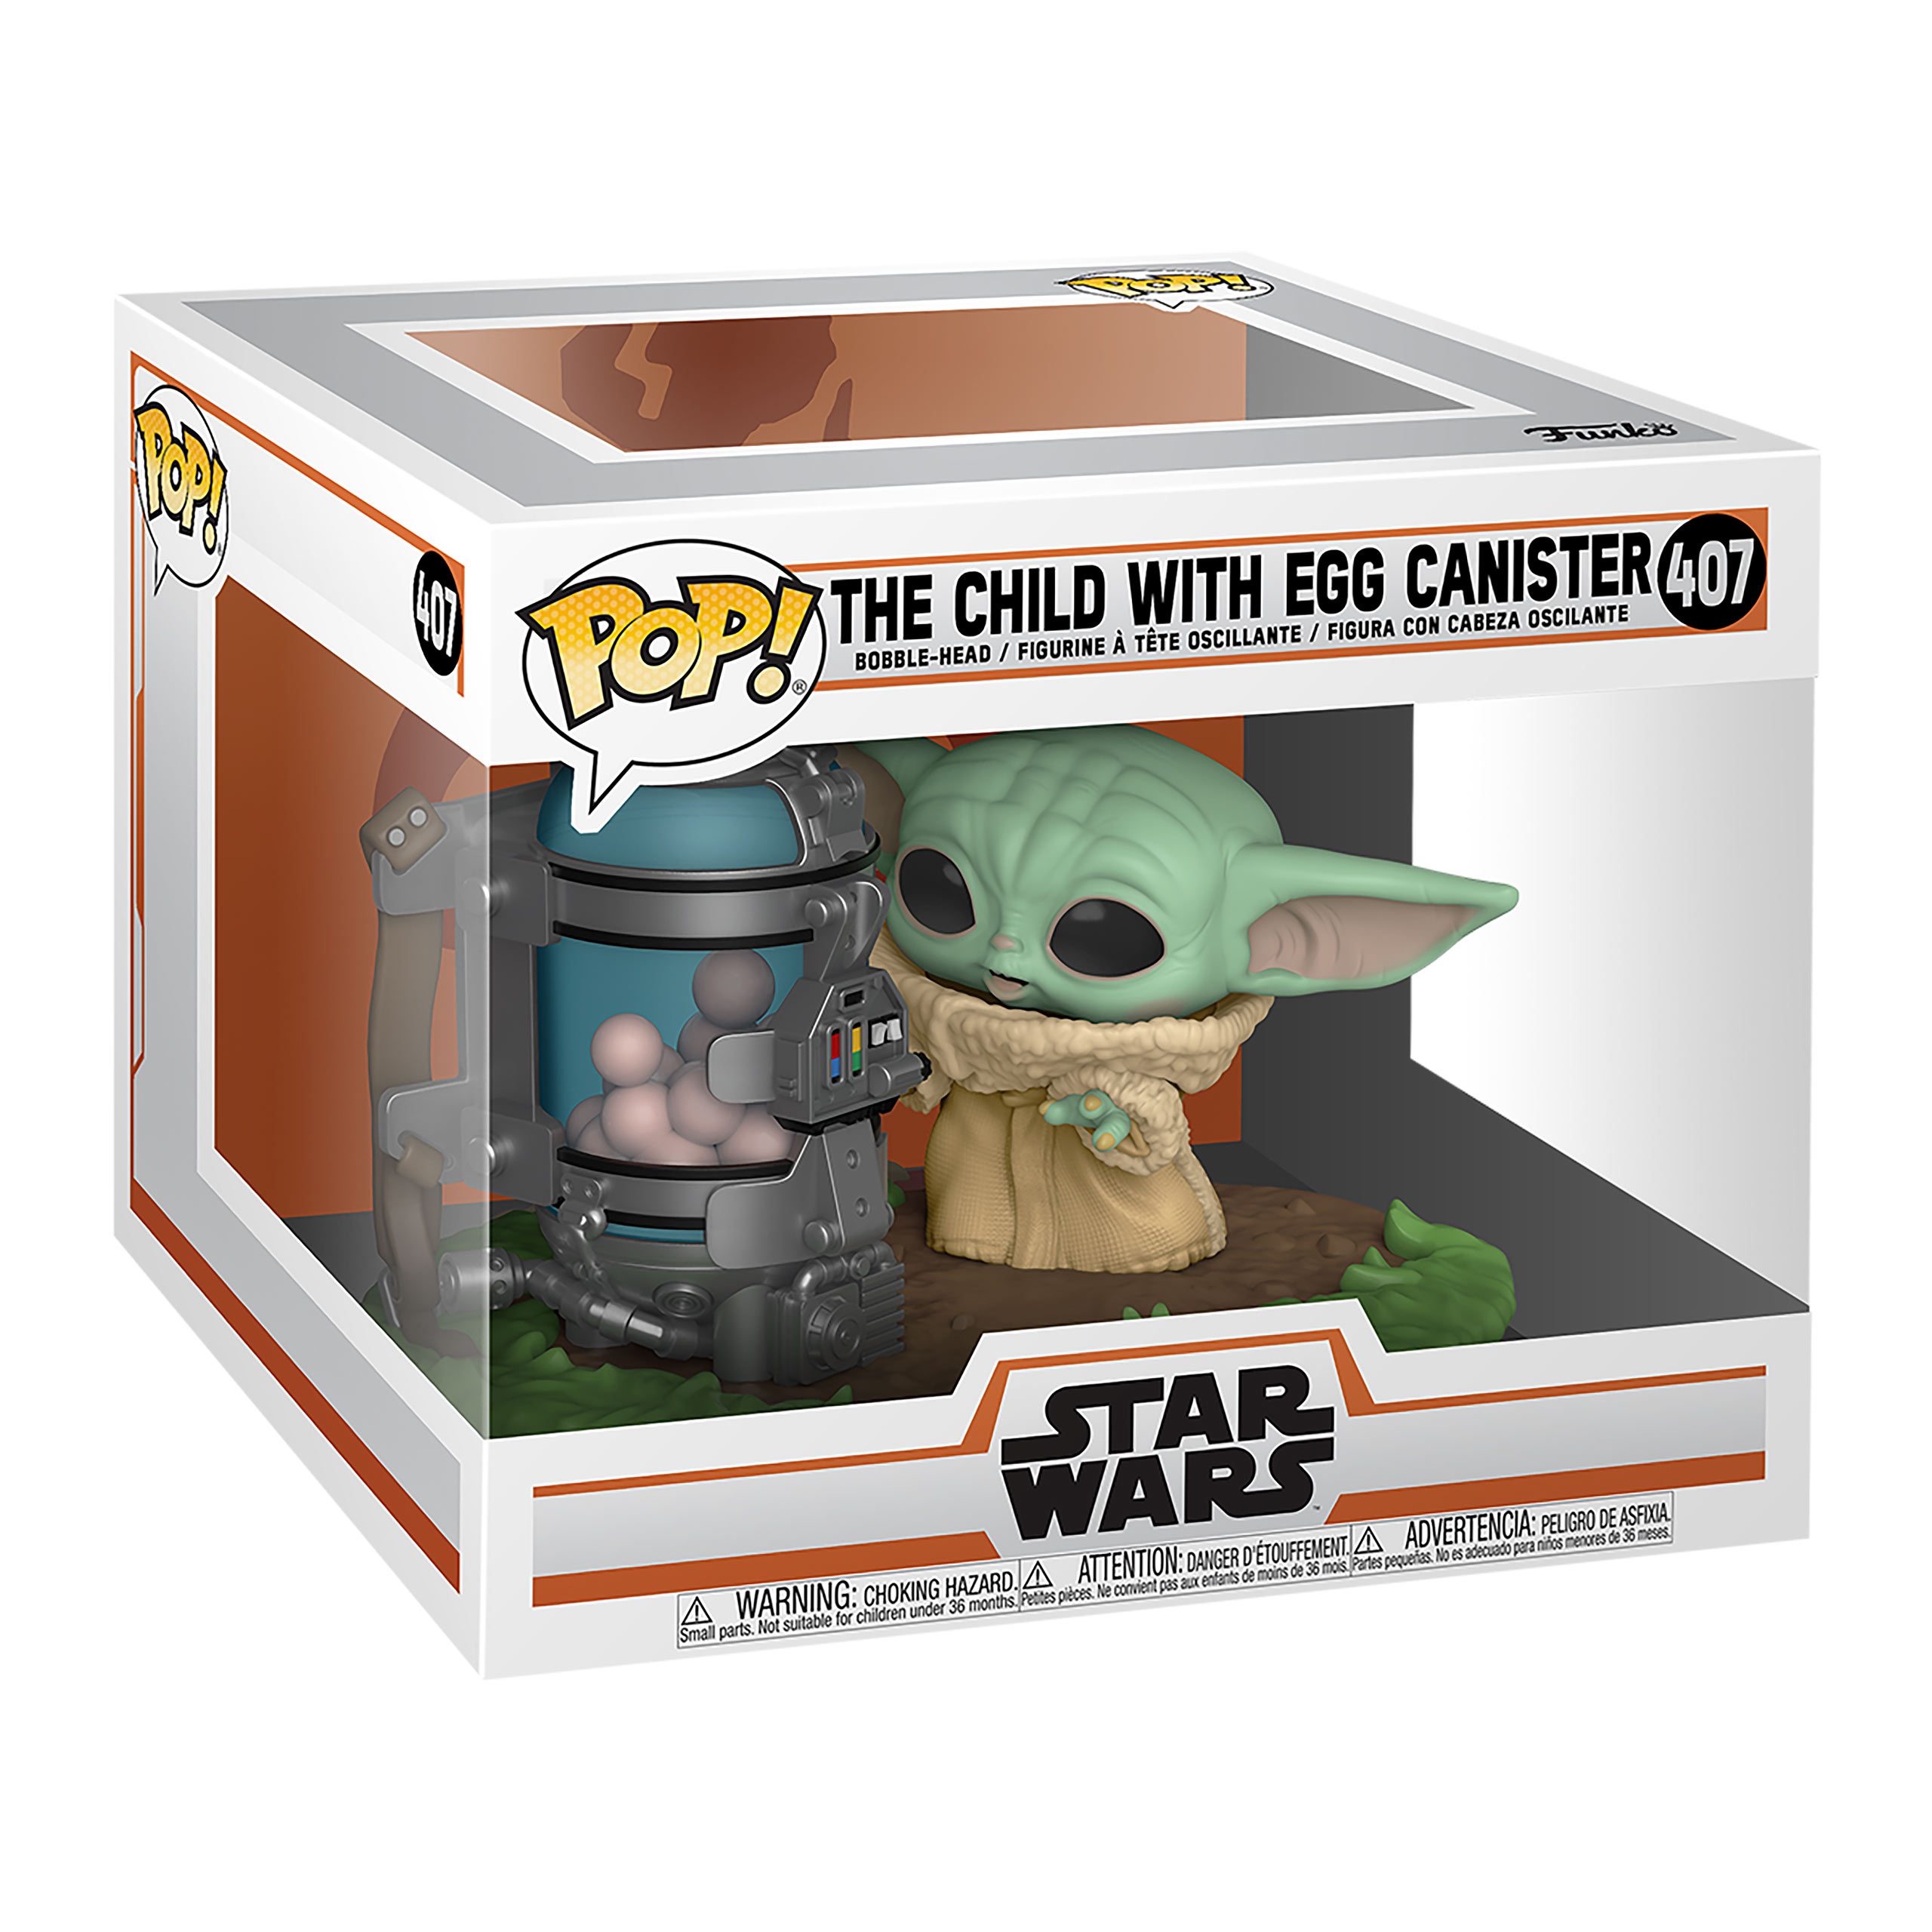 The Child with Egg Canister Funko Pop Bobblehead Figure - Star Wars The Mandalorian